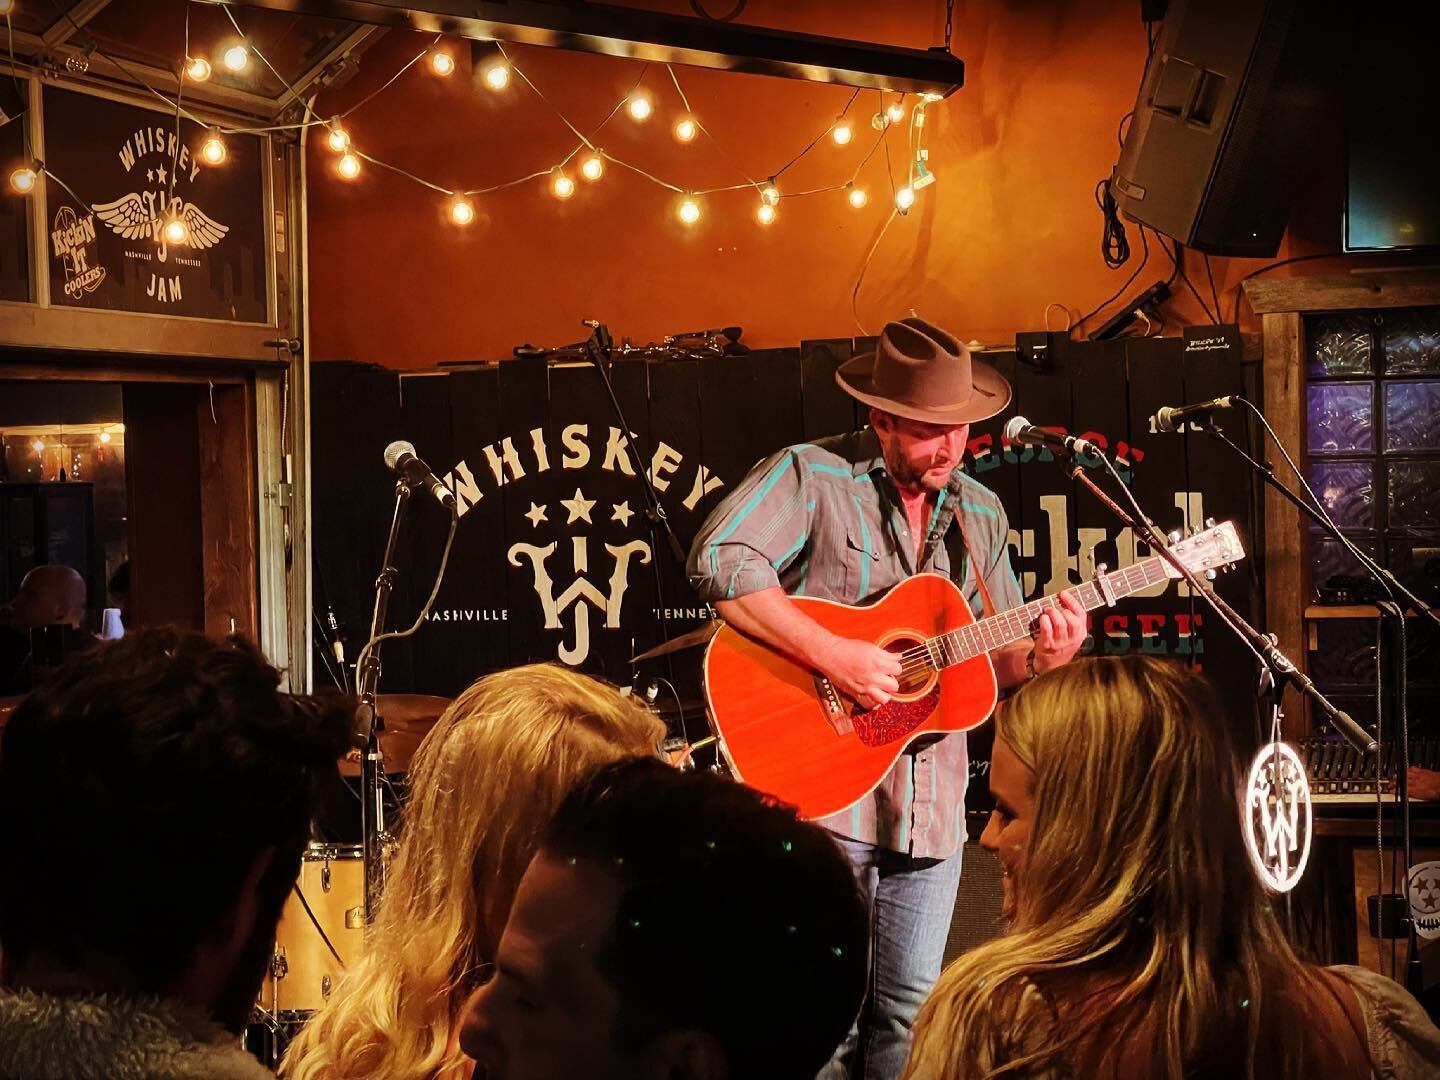 Thanks again @wardguenther and @whiskeyjam for having me out on Monday!  Good times in Nashville. 

📷 Photo by @flaminjaan